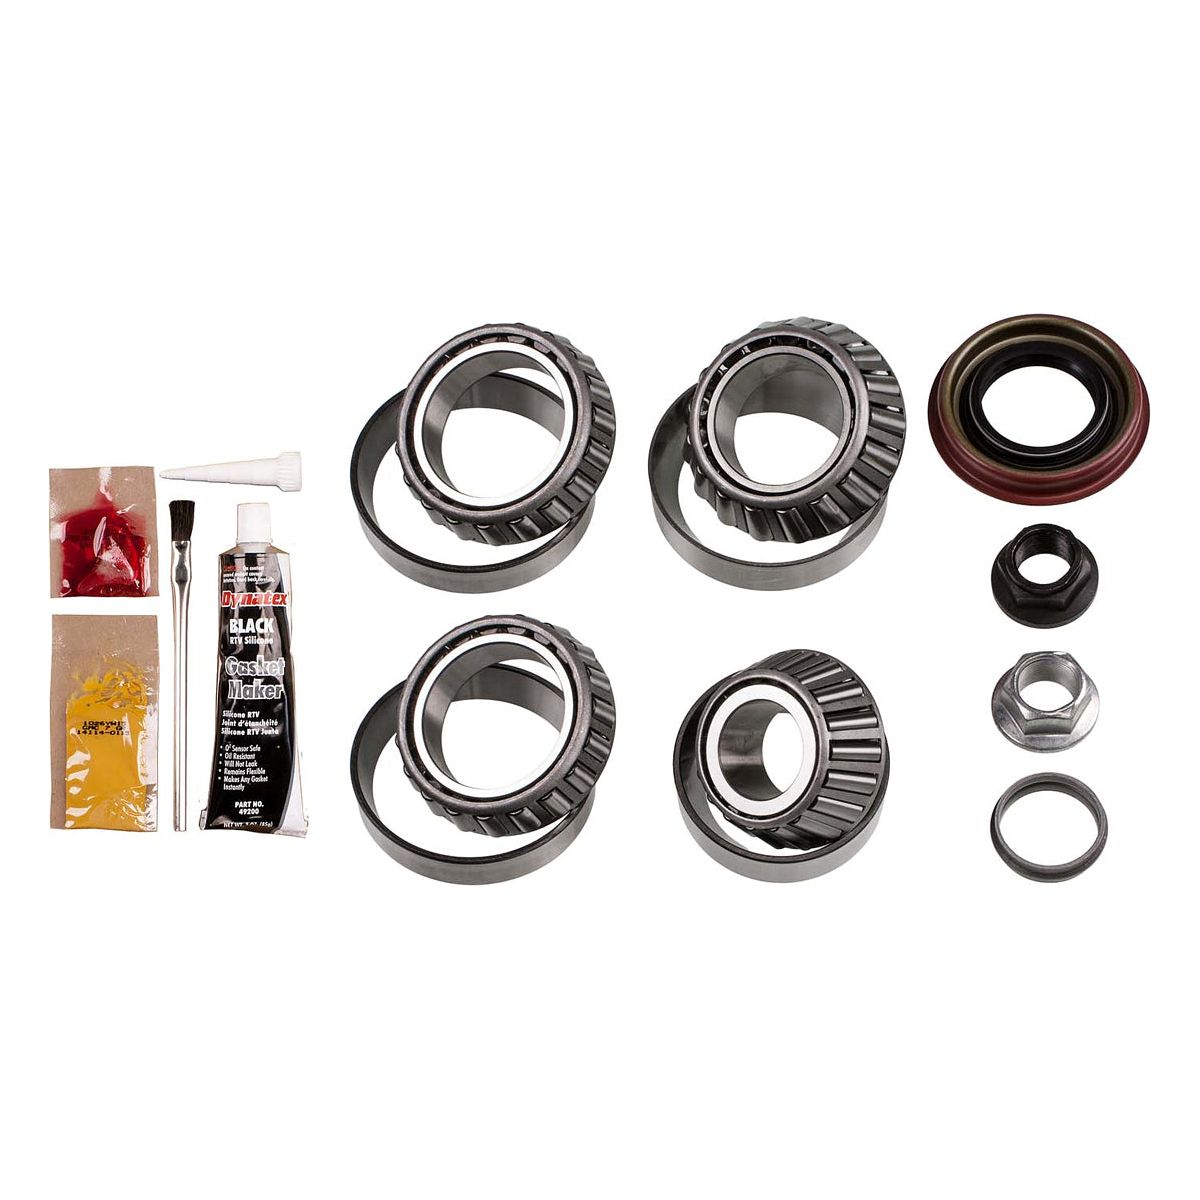 Motive Gear Differential Bearing Kits R9.75FRL